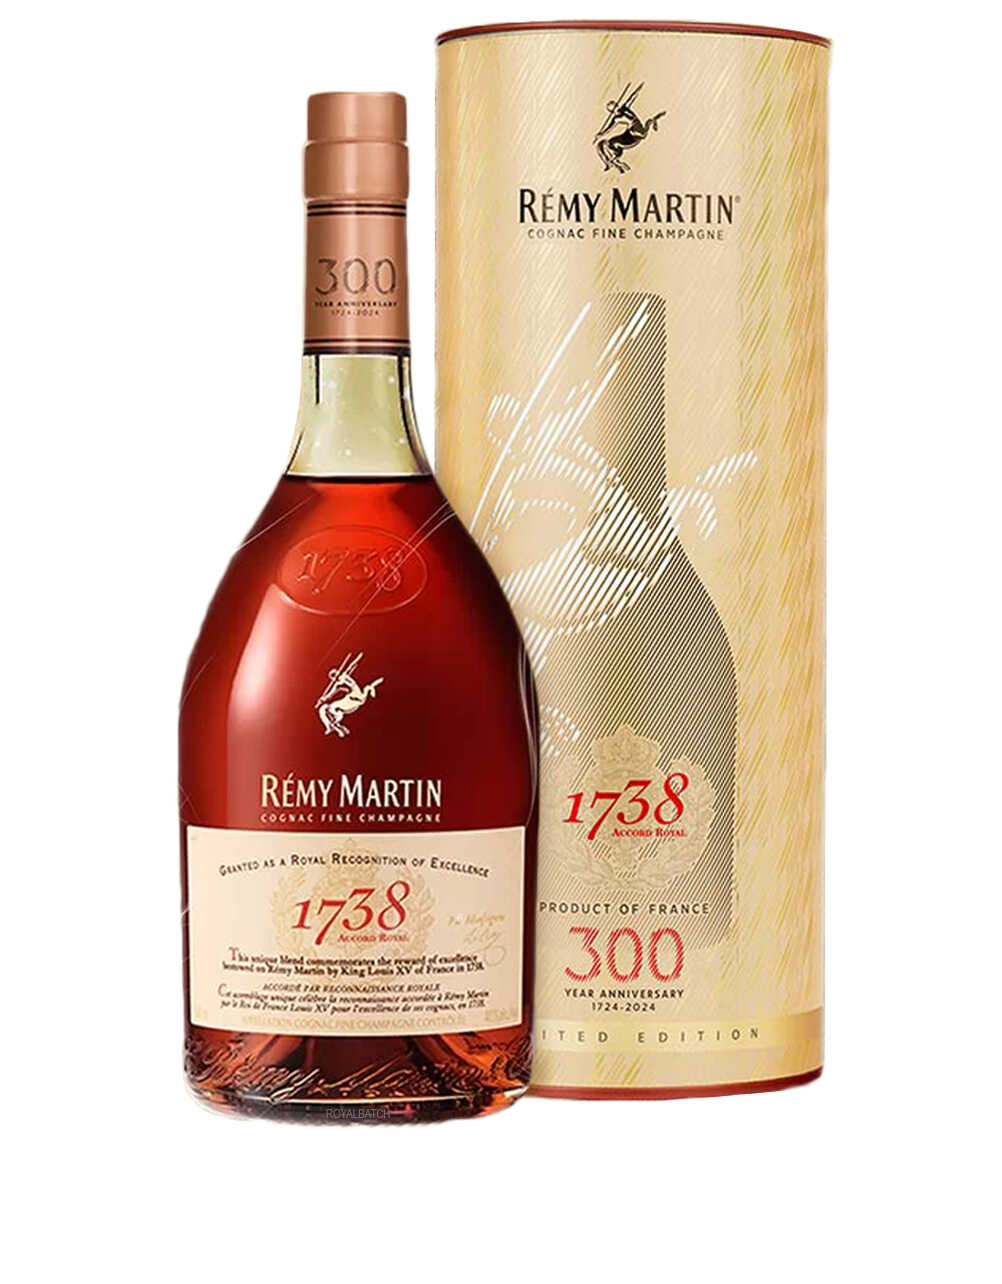 Remy Martin 1738 Limited Edition 300 Year Anniversary Cognac